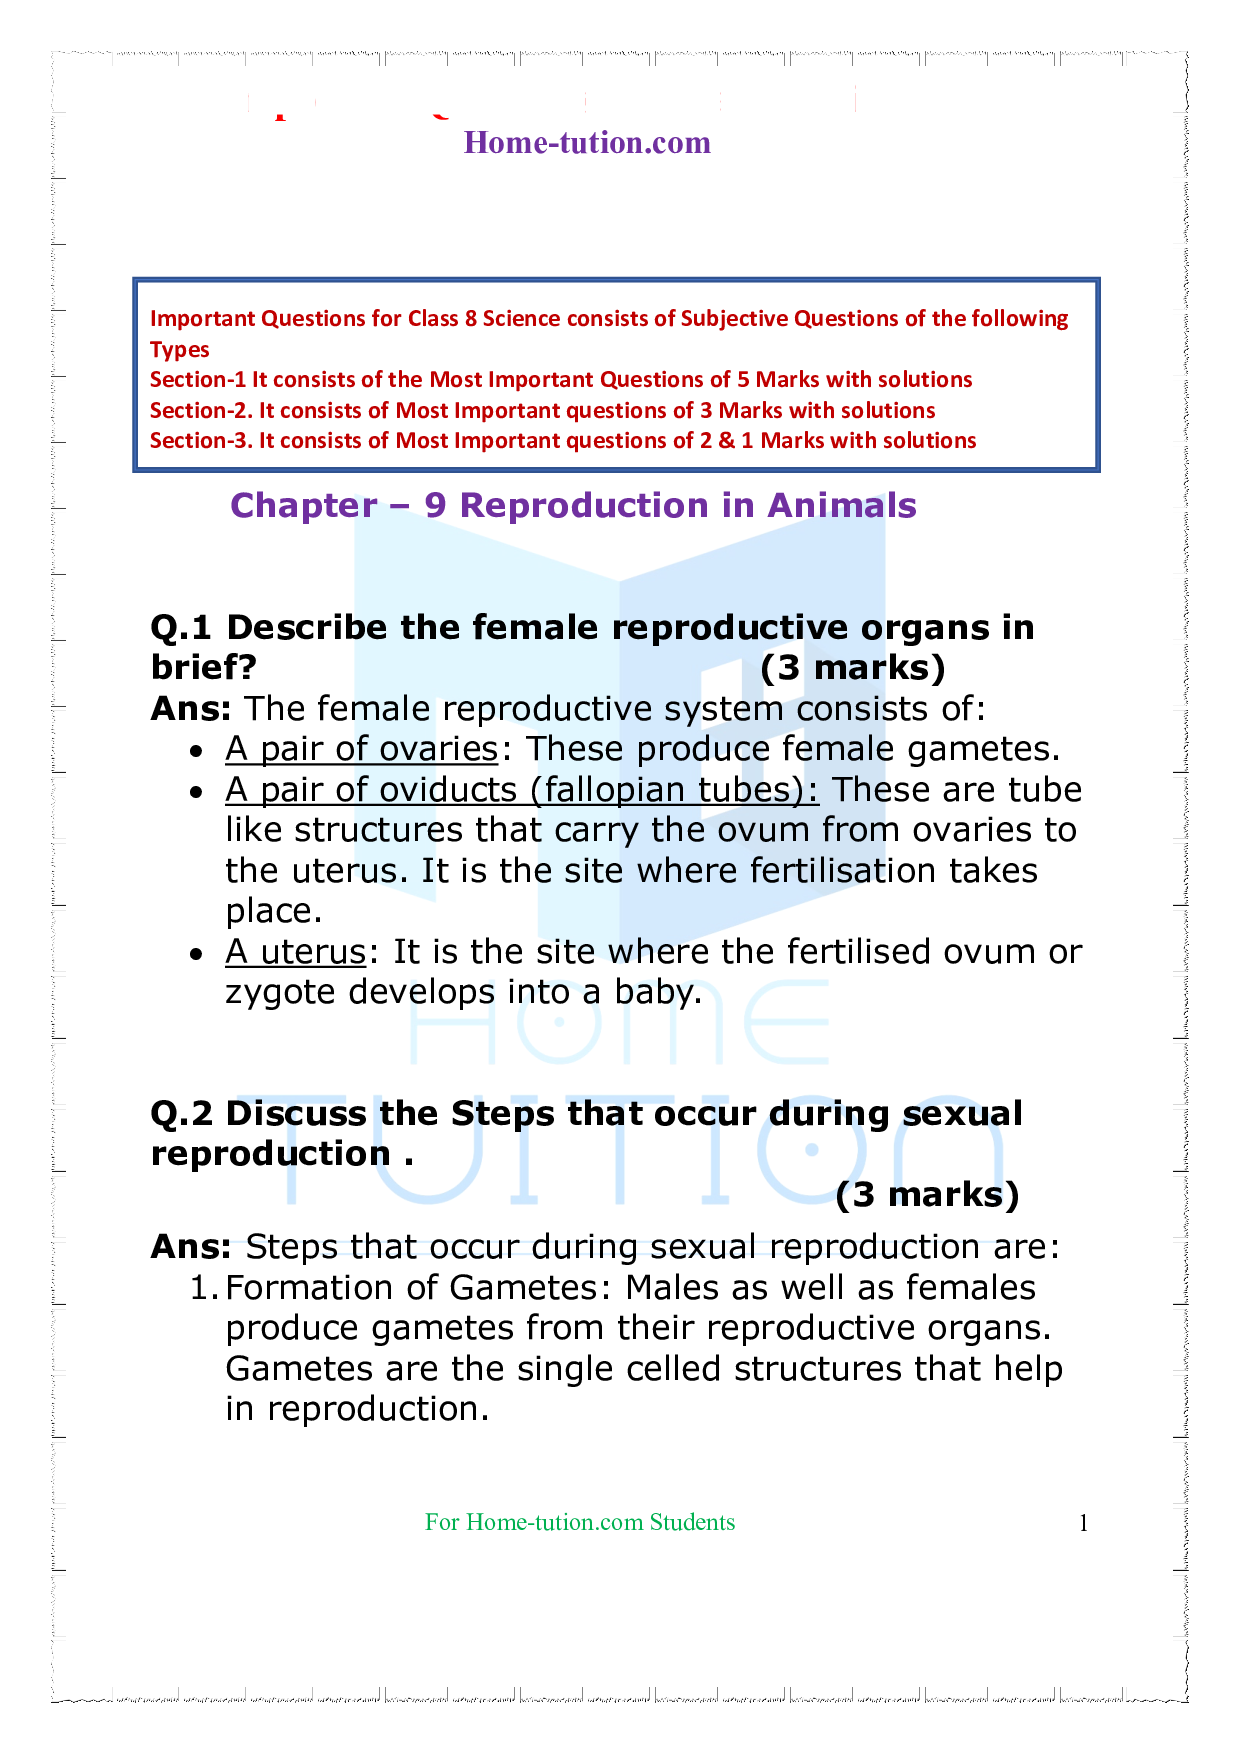 Important Questions for Chapter -9 Reproduction in Animals